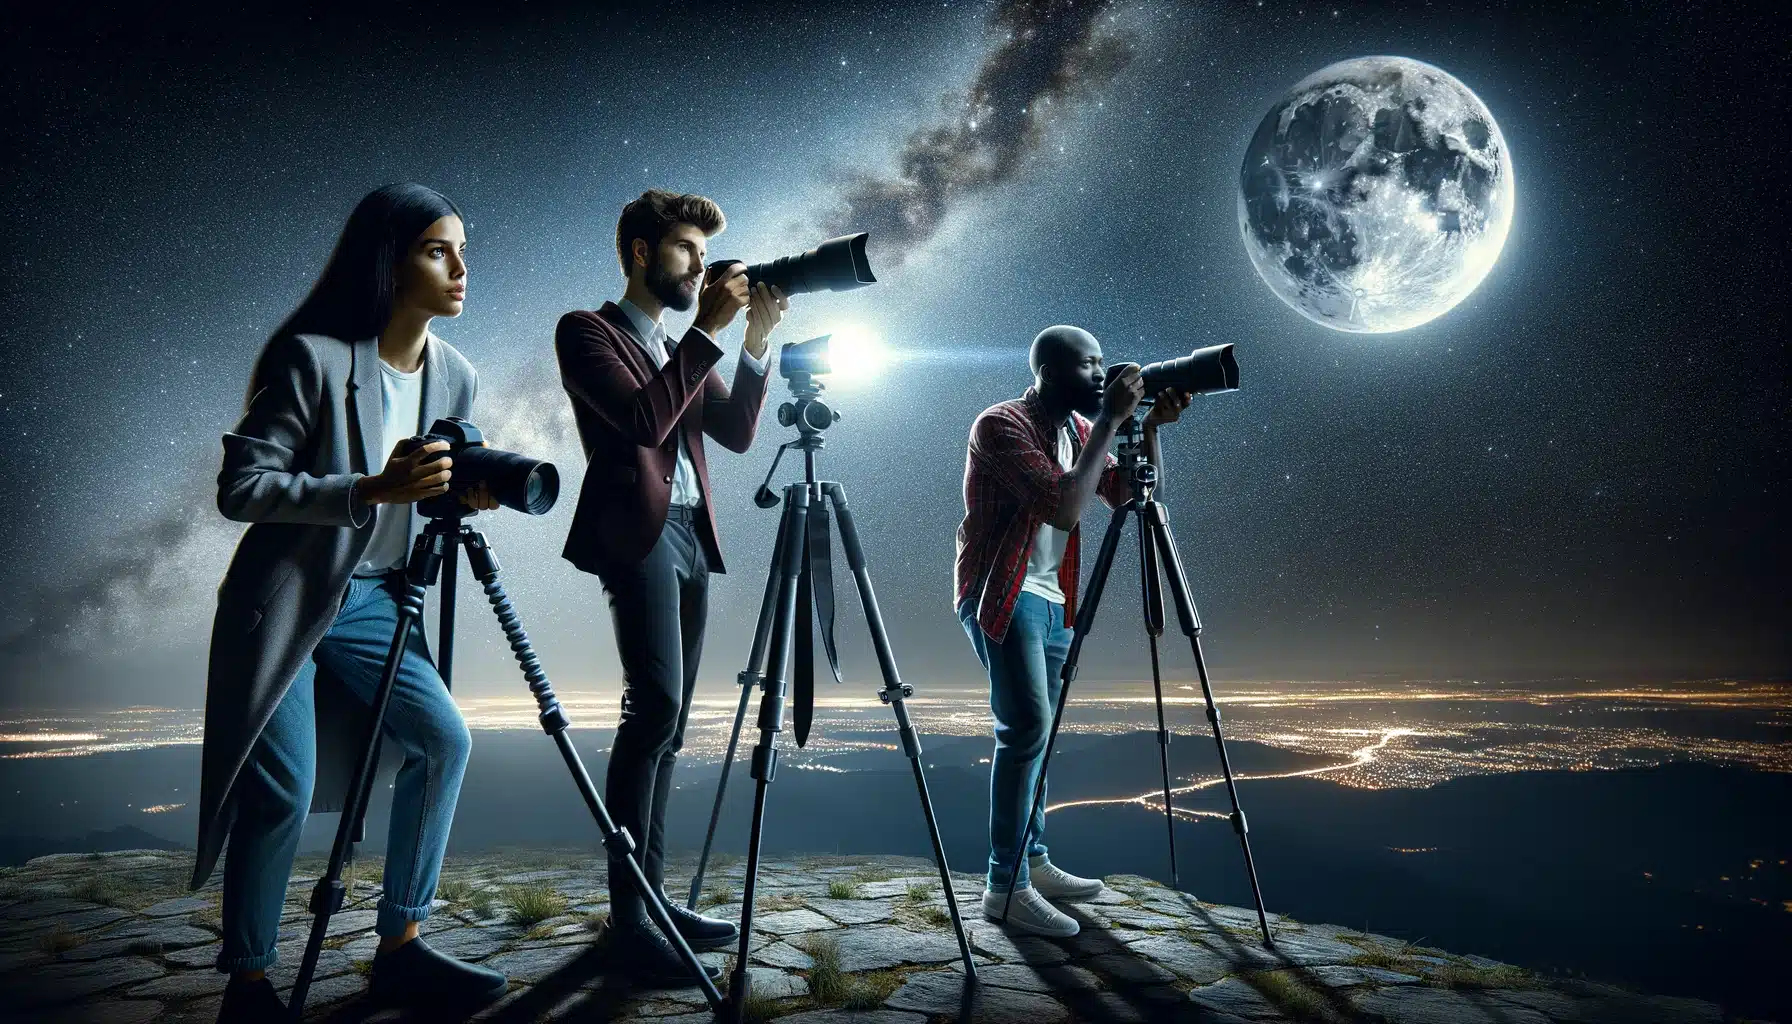 Three diverse photographers using long exposure techniques to capture the moon and stars at night from a high vantage point.